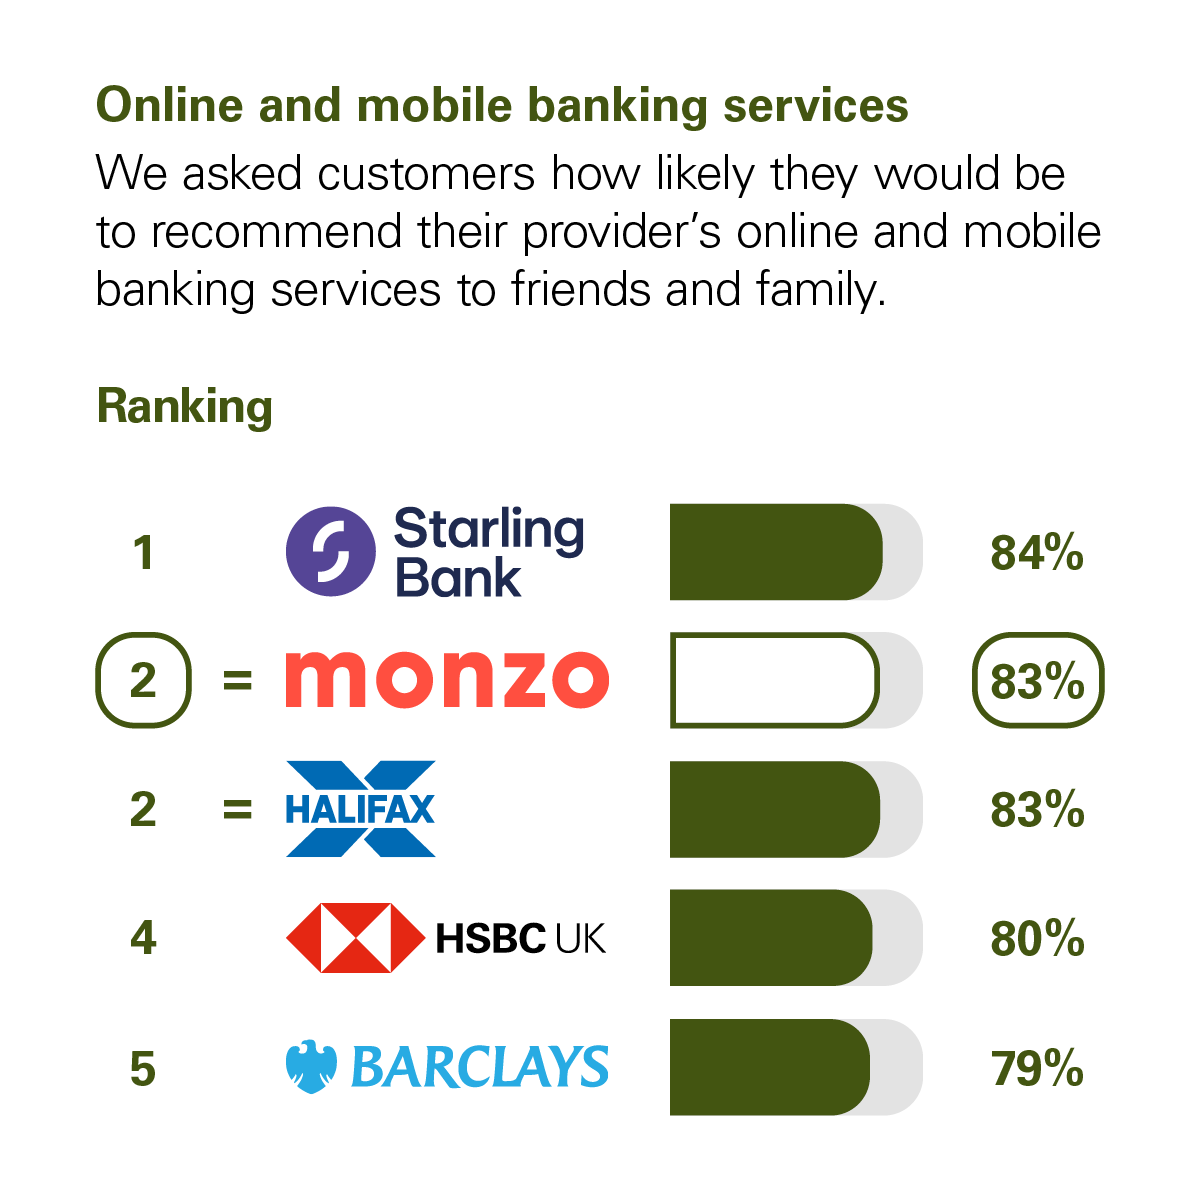 Graph showing the results of the CMA scoring of UK banks in the Online and Mobile Banking Services category. The CMA asked customers how likely they would be to recommend their provider's online and mobile banking services to friends and family. The rankings with percentage scores are: 1st Starling Bank with 84%. Joint 2nd Monzo and Halifax with 83%. 4th HSBC UK with 80%. 5th Barclays with 79%.